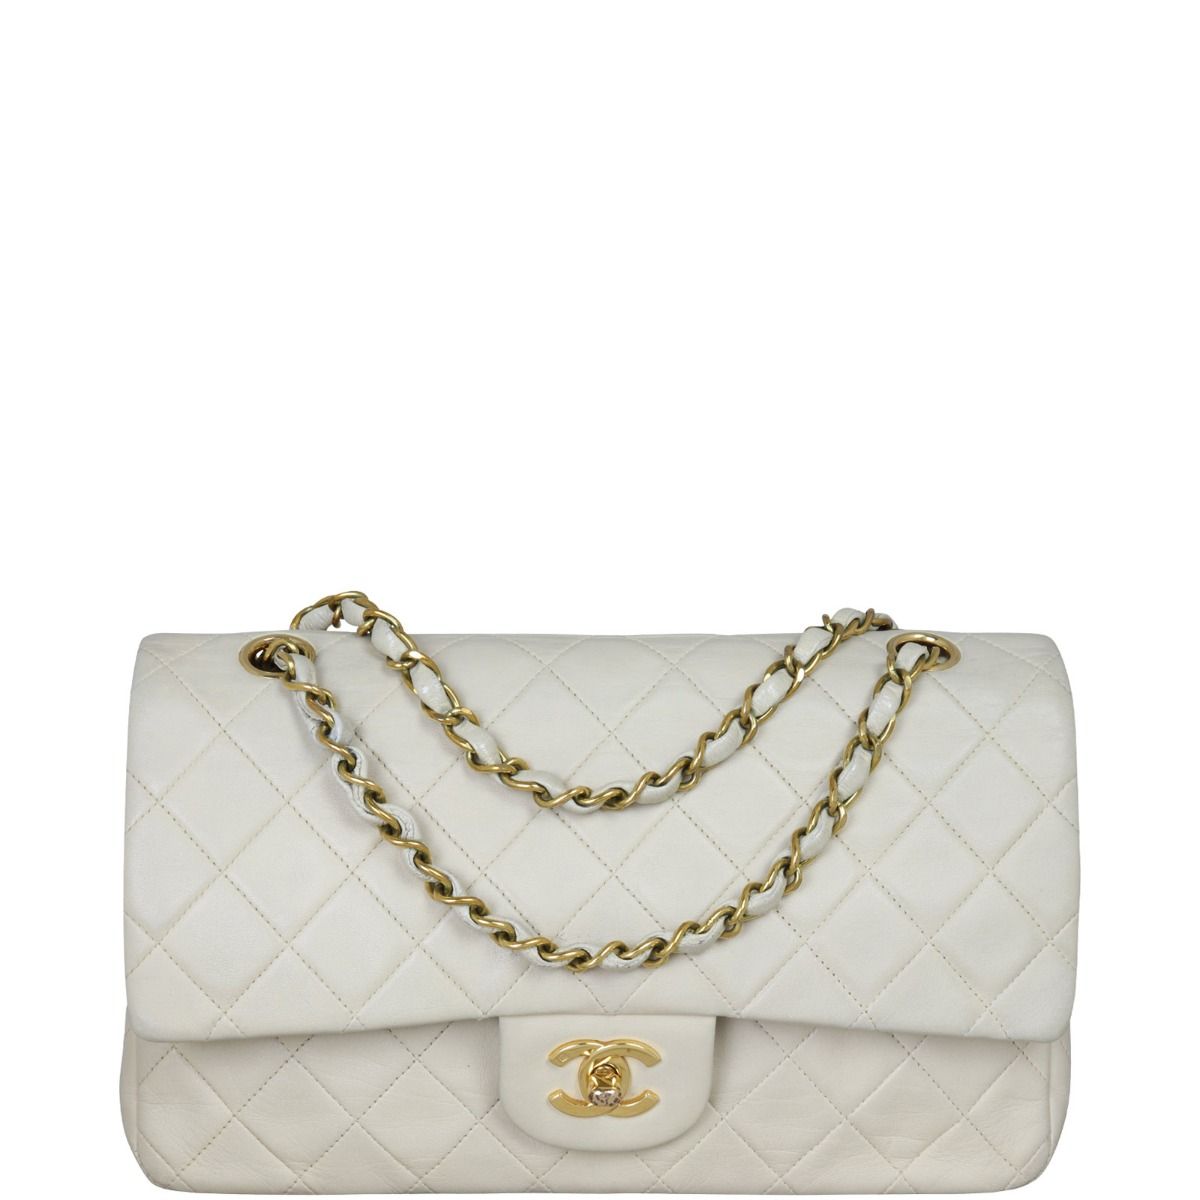 CHANEL CLASSIC FLAP BAG  Be Size 255  La Deluxe